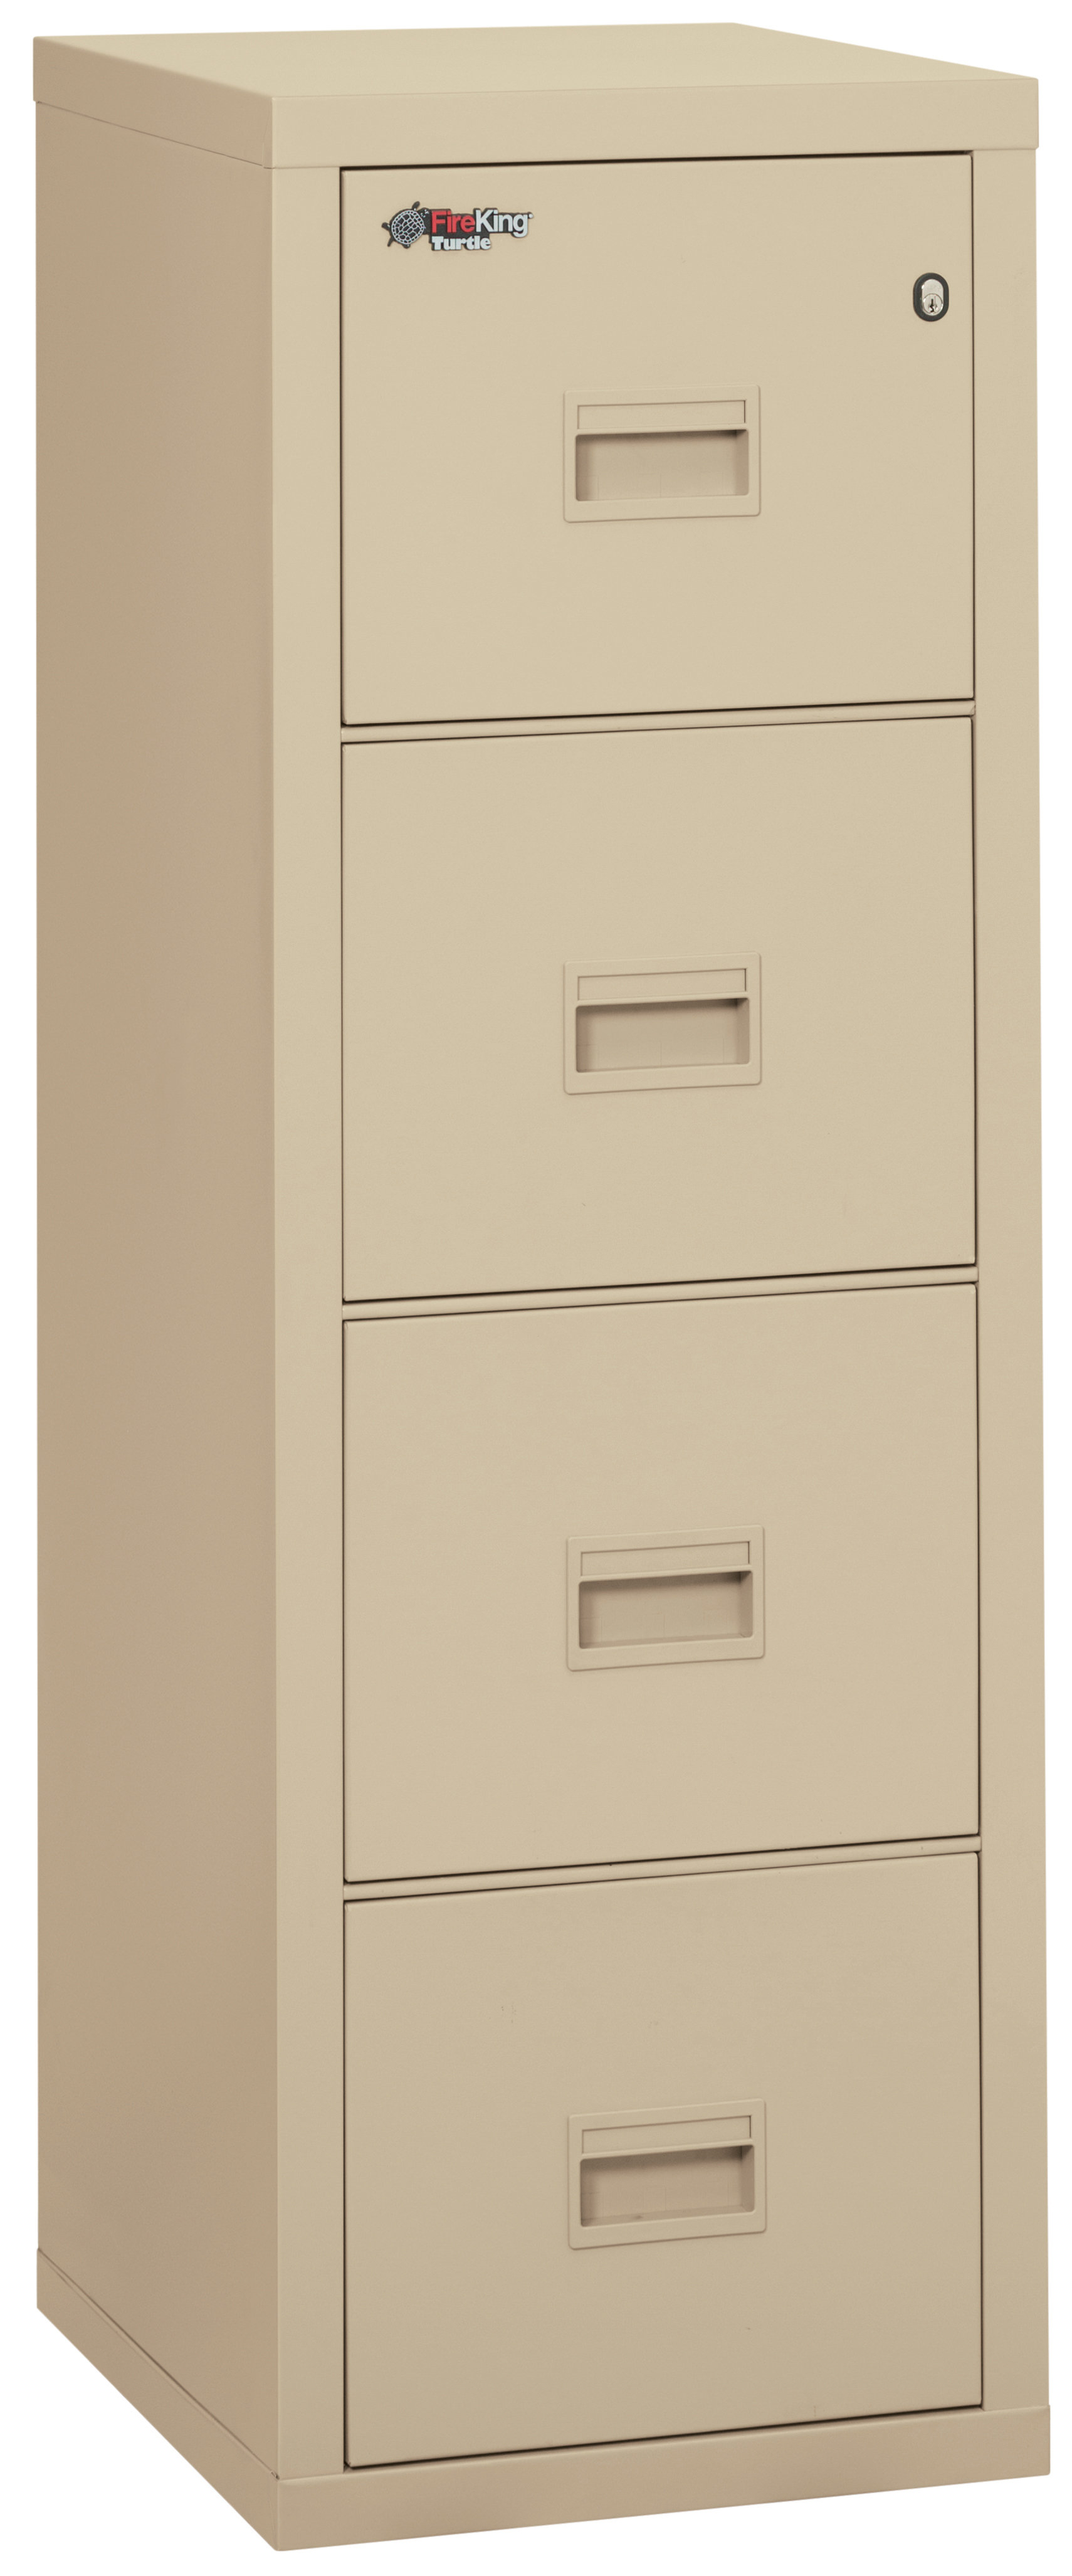 Fireking Turtle Fireproof 4 Drawer Vertical File Cabinet Reviews within proportions 1710 X 4108